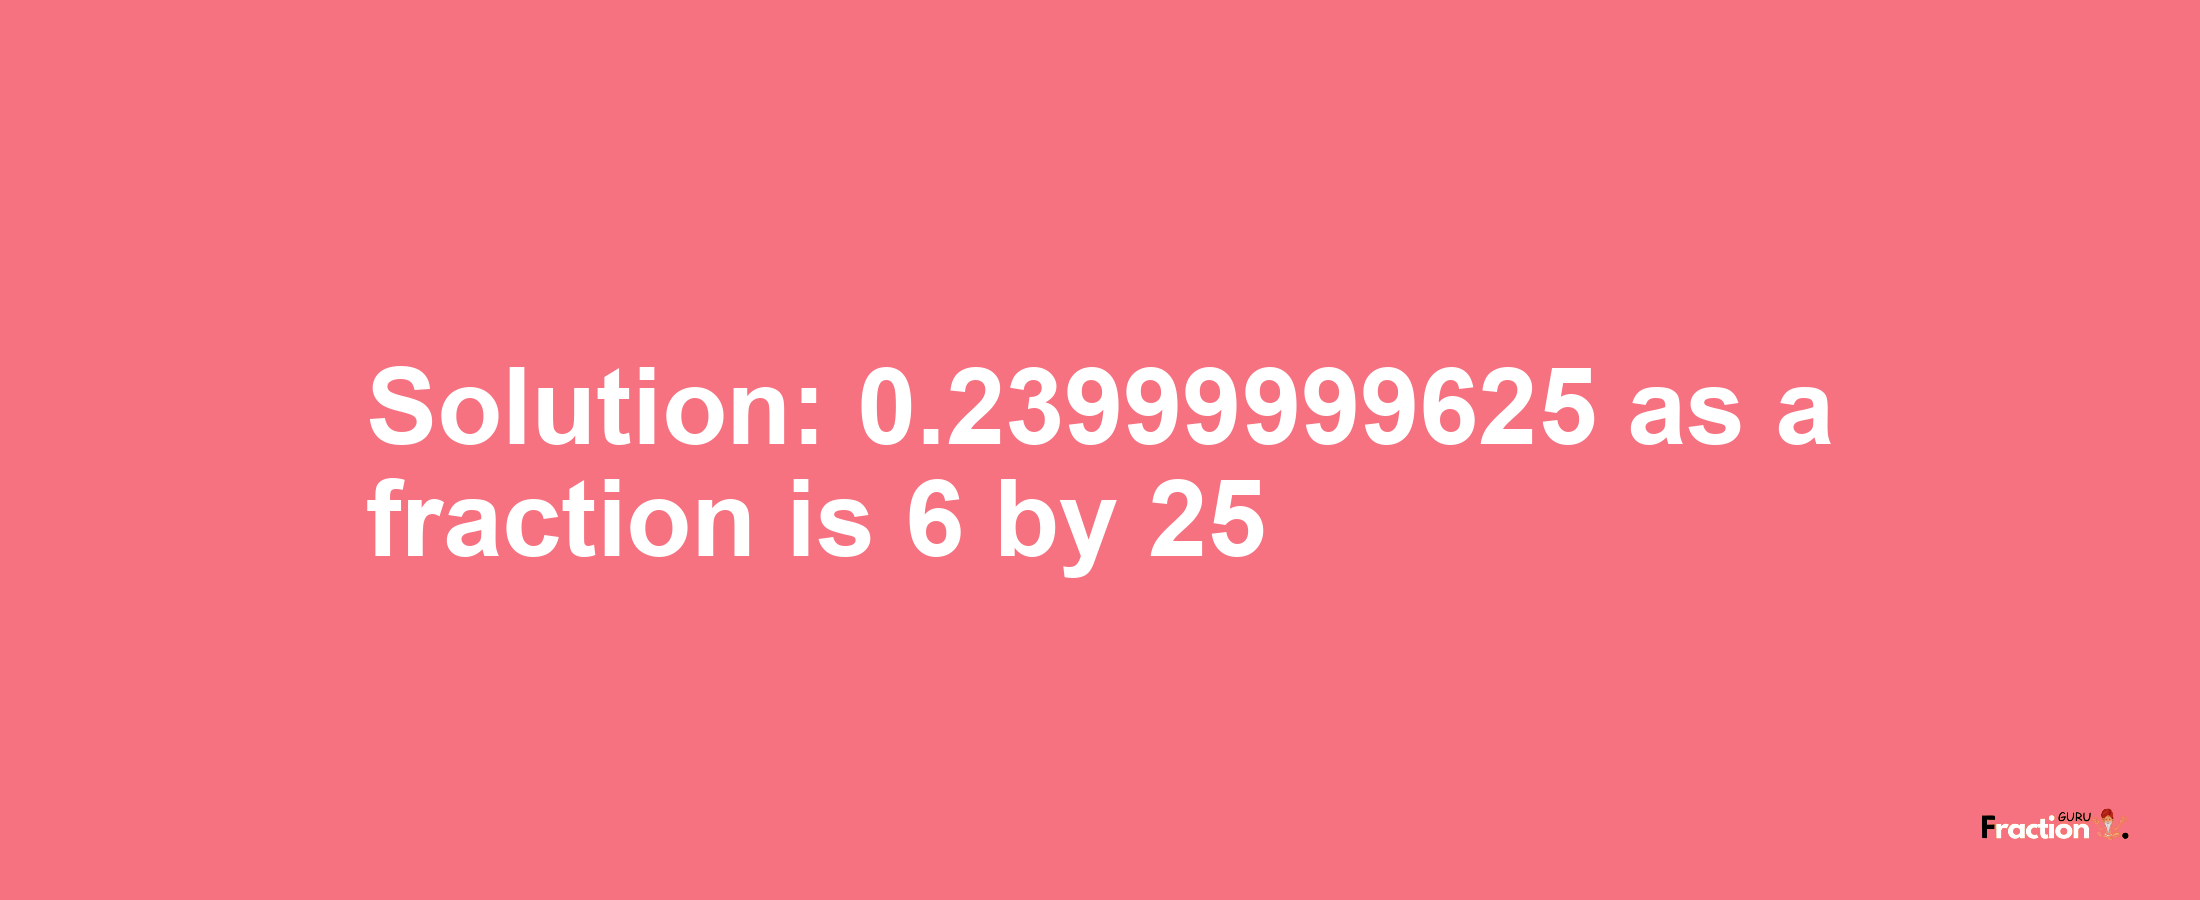 Solution:0.23999999625 as a fraction is 6/25